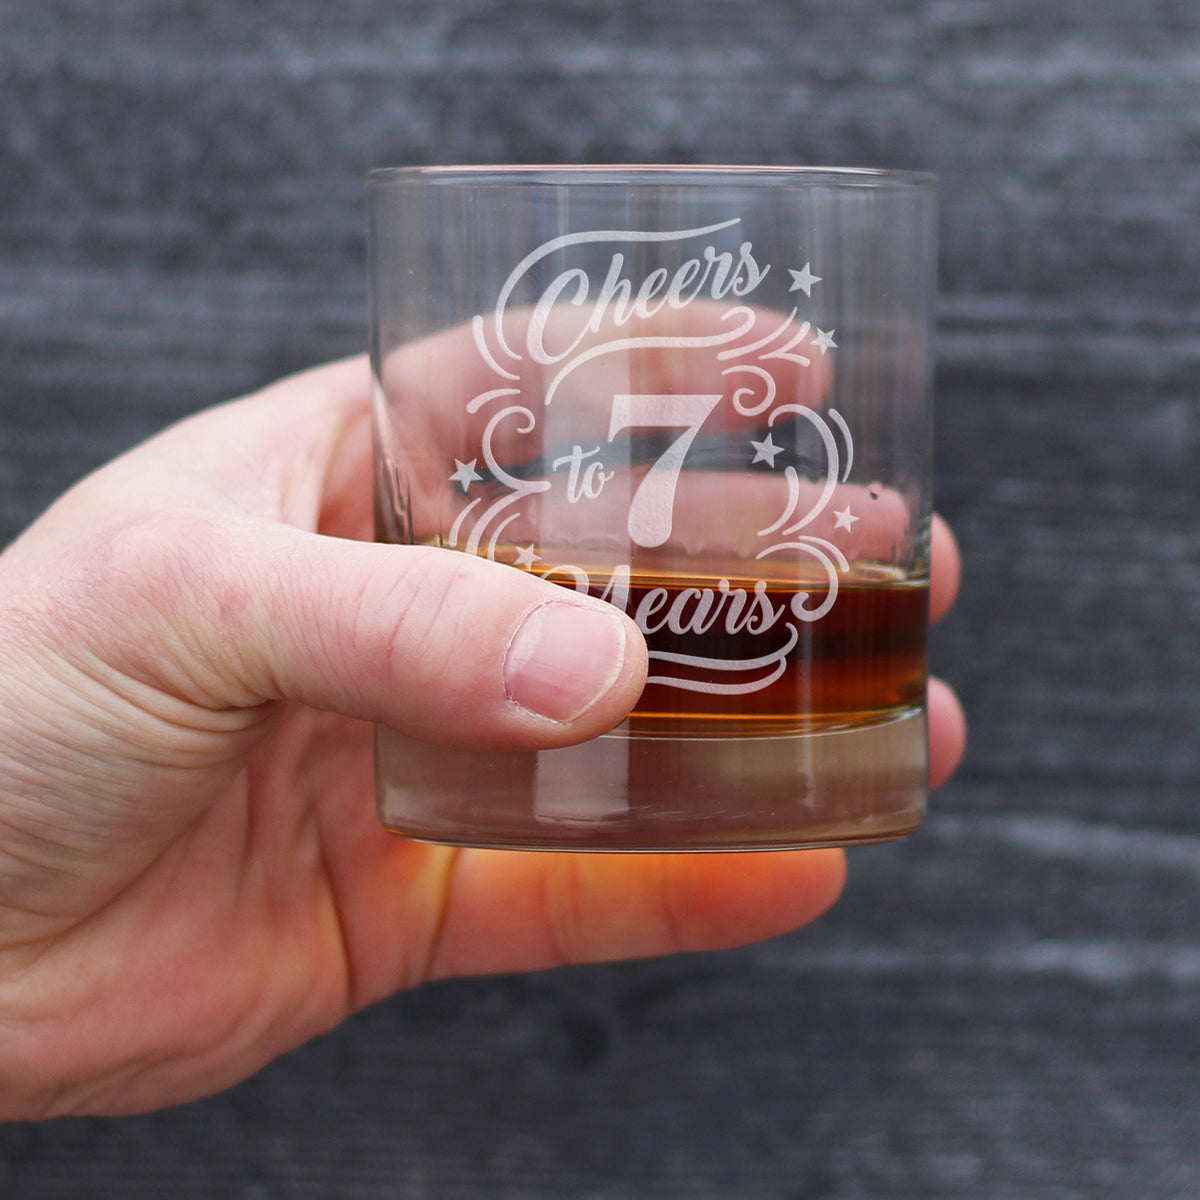 Cheers to 7 Years - Whiskey Rocks Glass Gifts for Women &amp; Men - 7th Anniversary Party Decor - 10.25 Oz Glasses